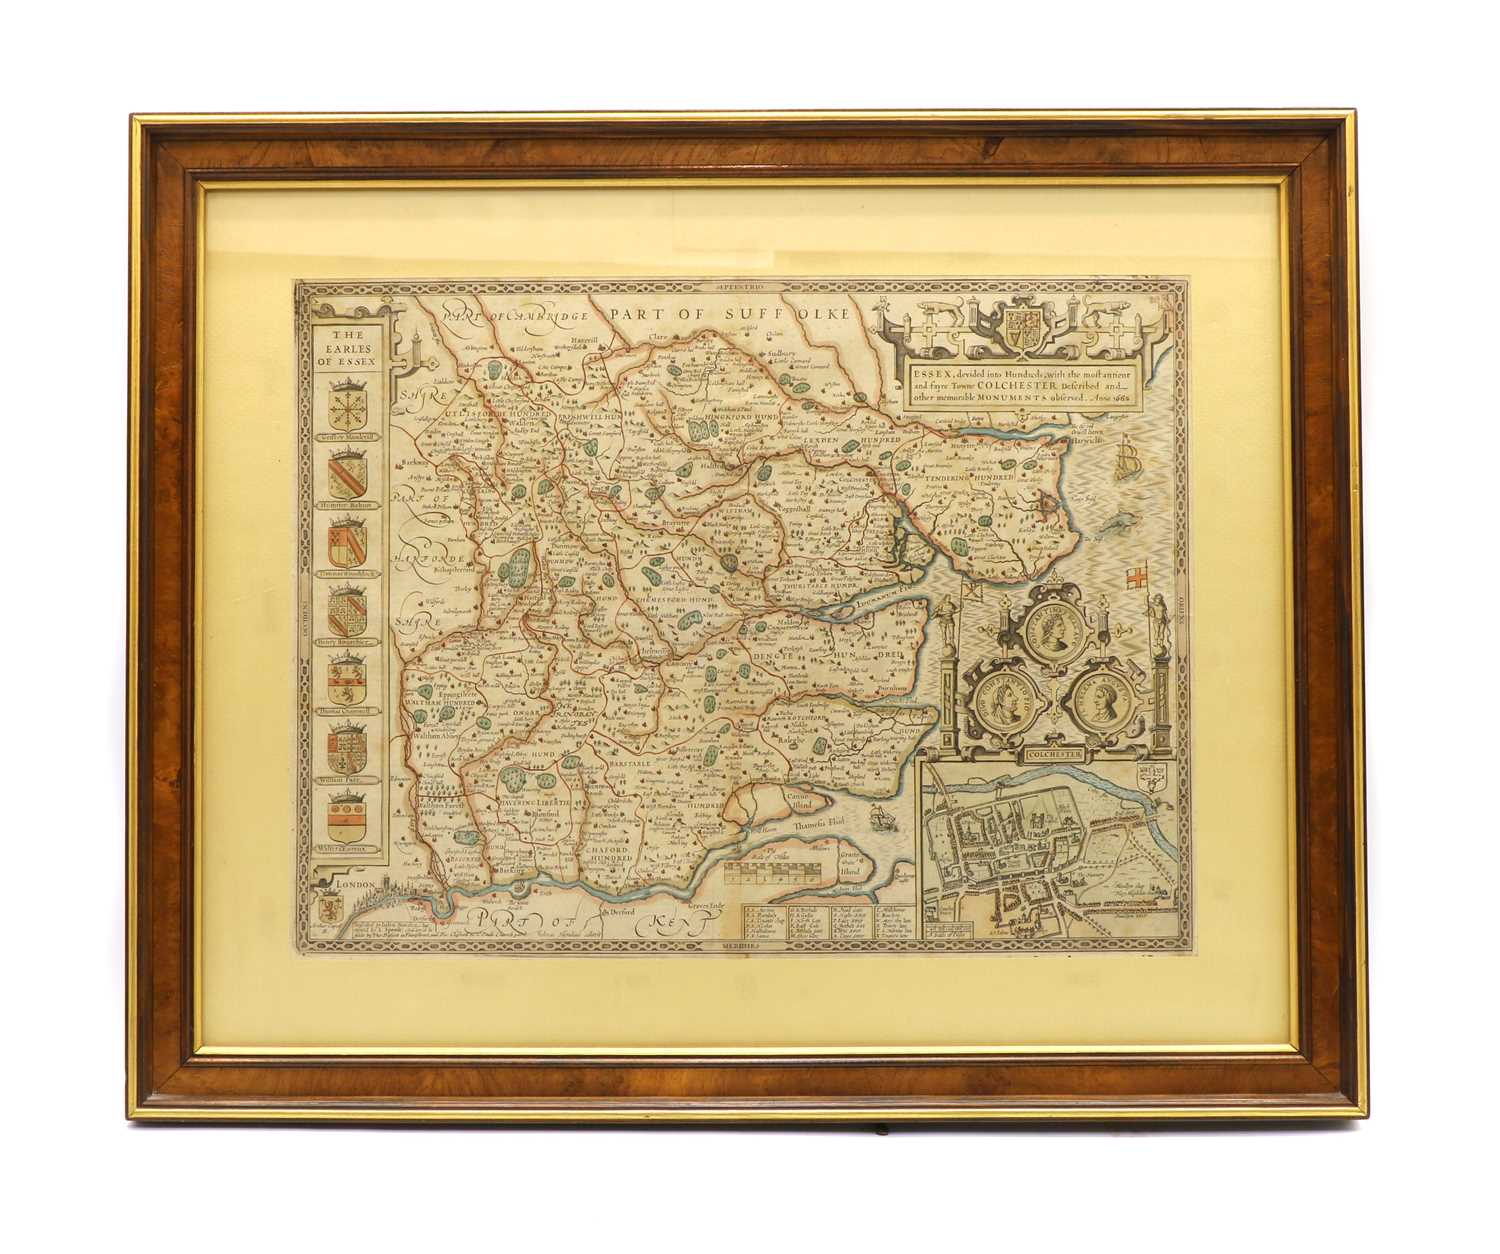 Lot 246 - A 17th century map of Essex, by Norden and Speede